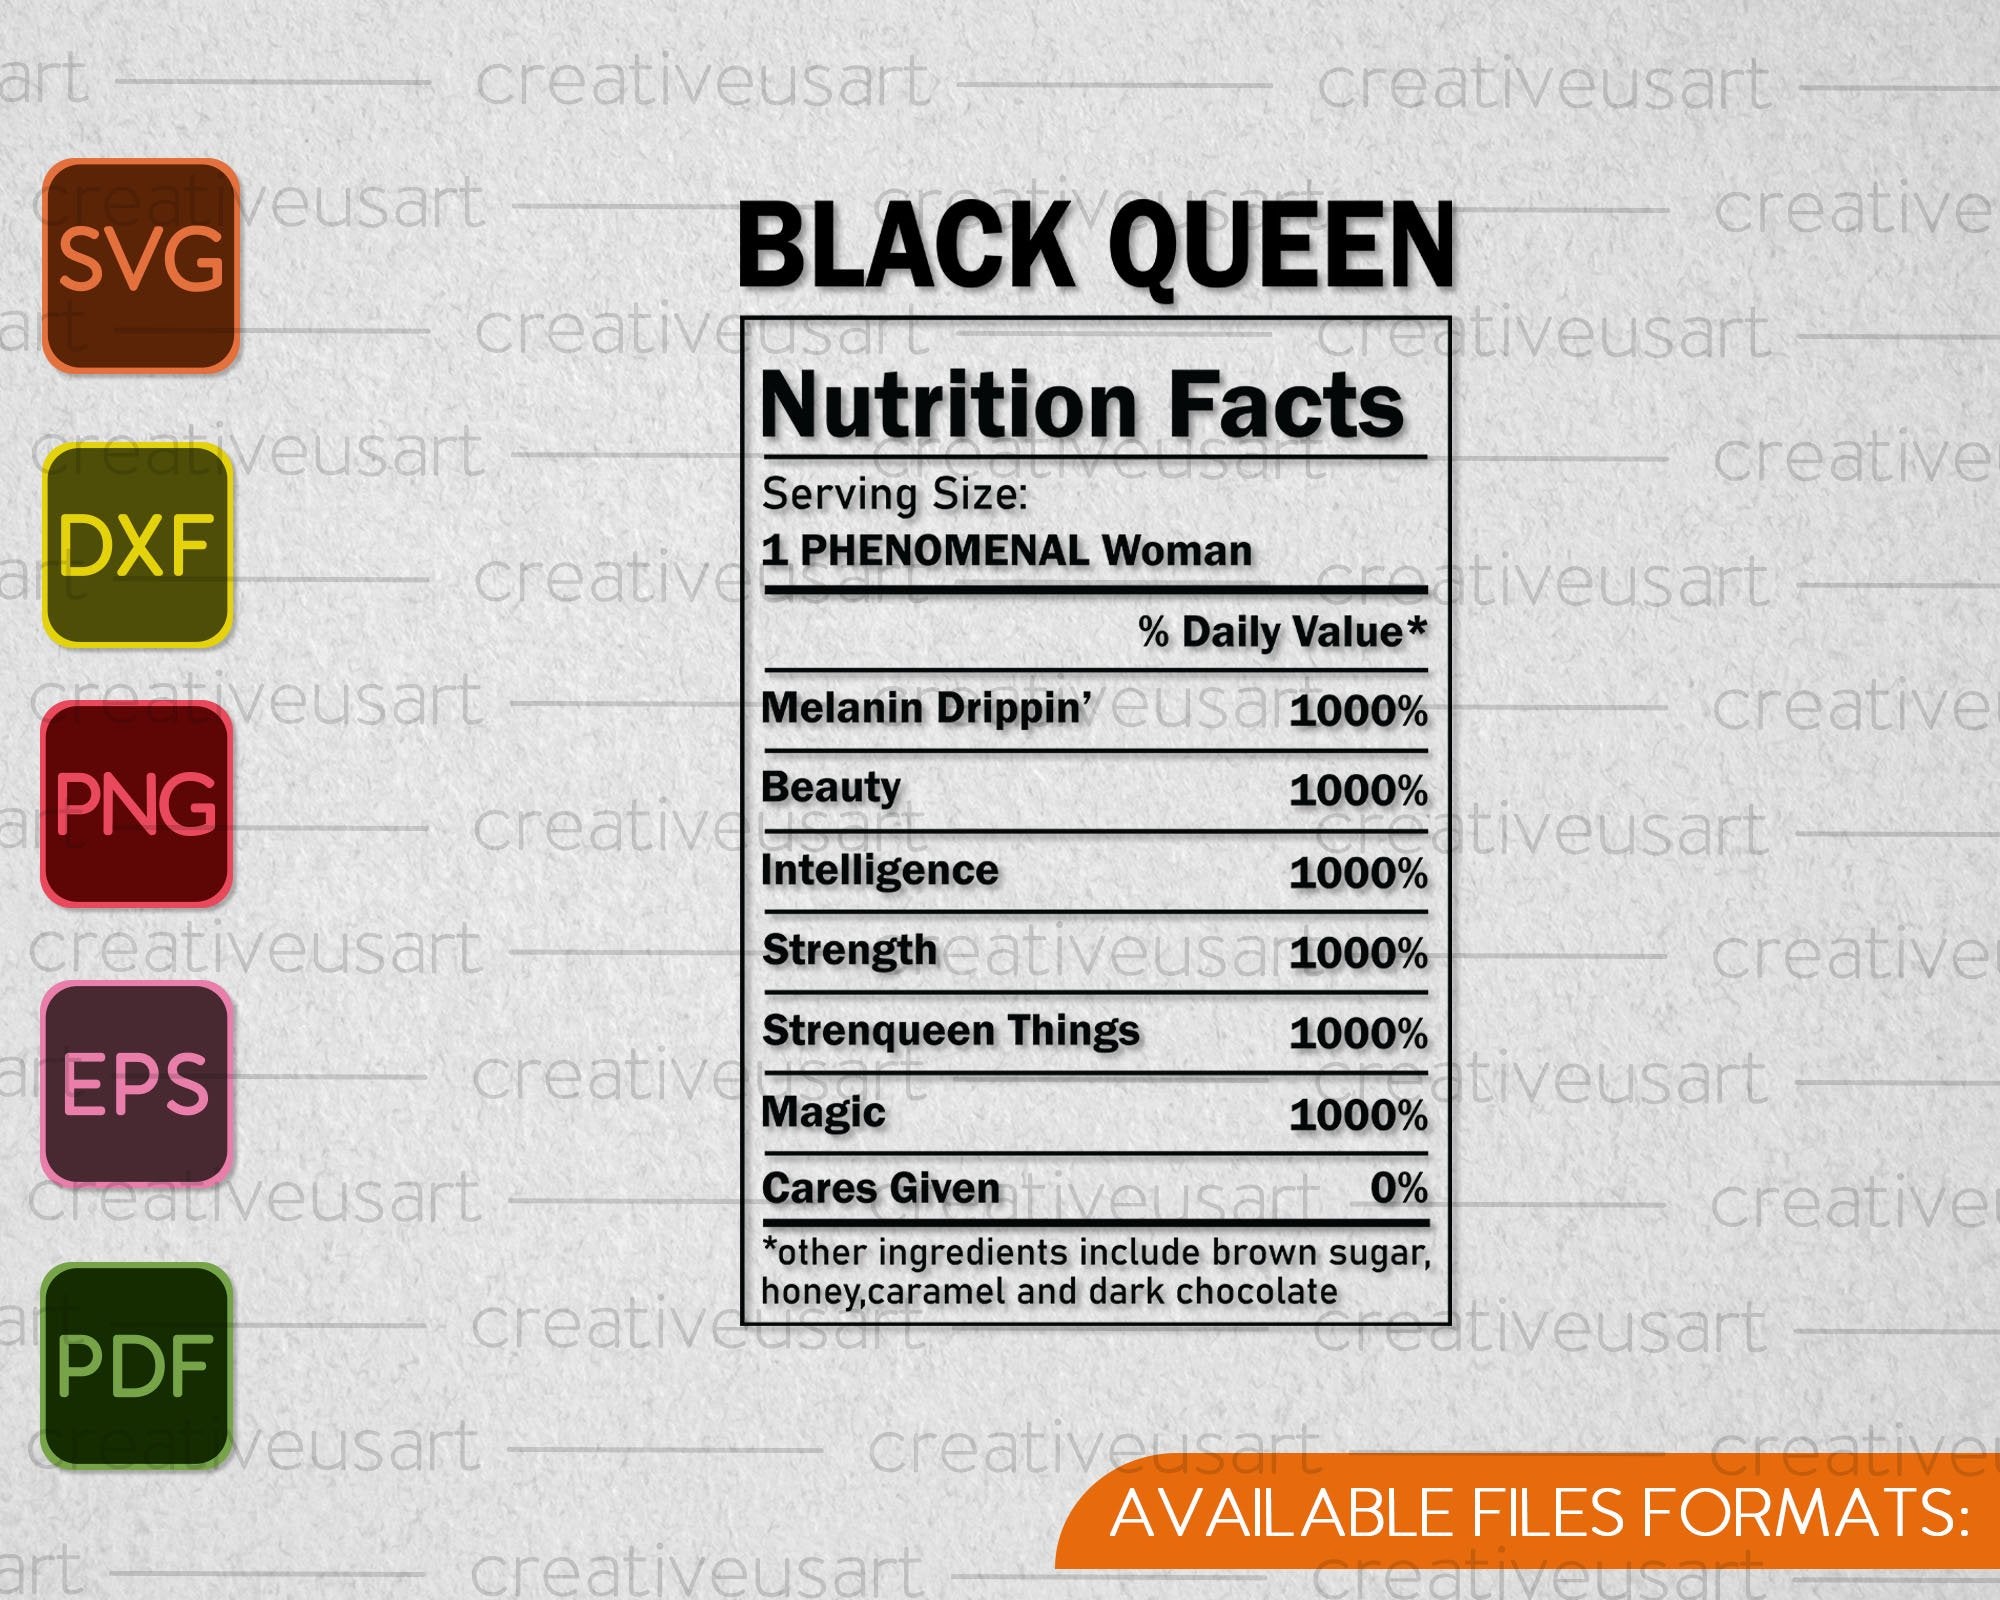 Download Black Queen Nutrition Facts Svg Png Files Creativeusarts